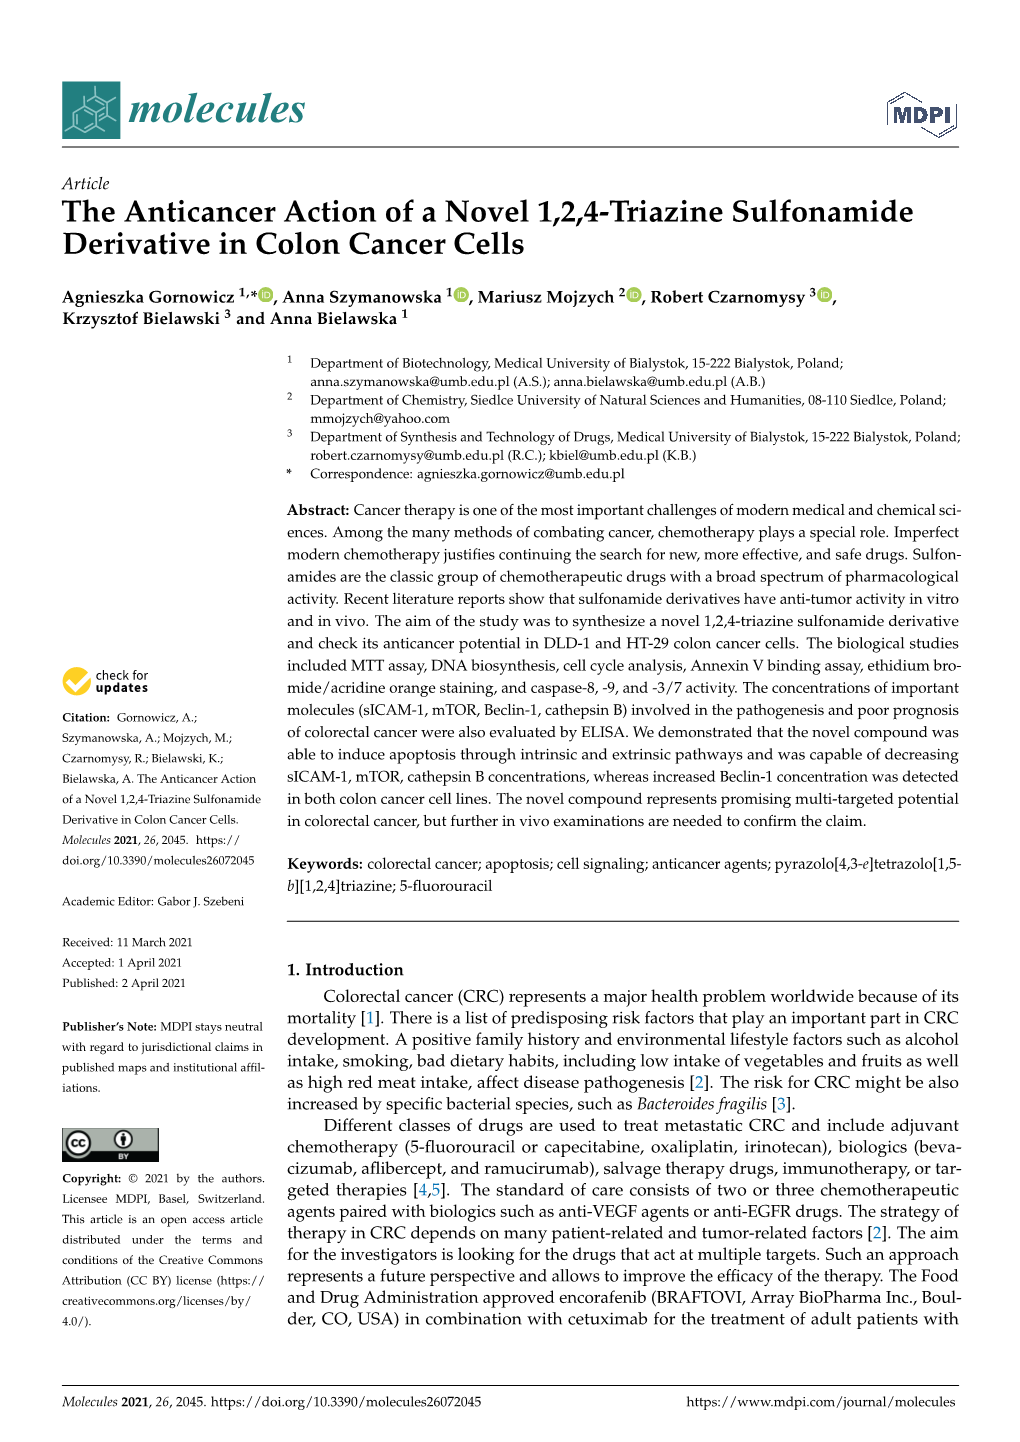 The Anticancer Action of a Novel 1,2,4-Triazine Sulfonamide Derivative in Colon Cancer Cells